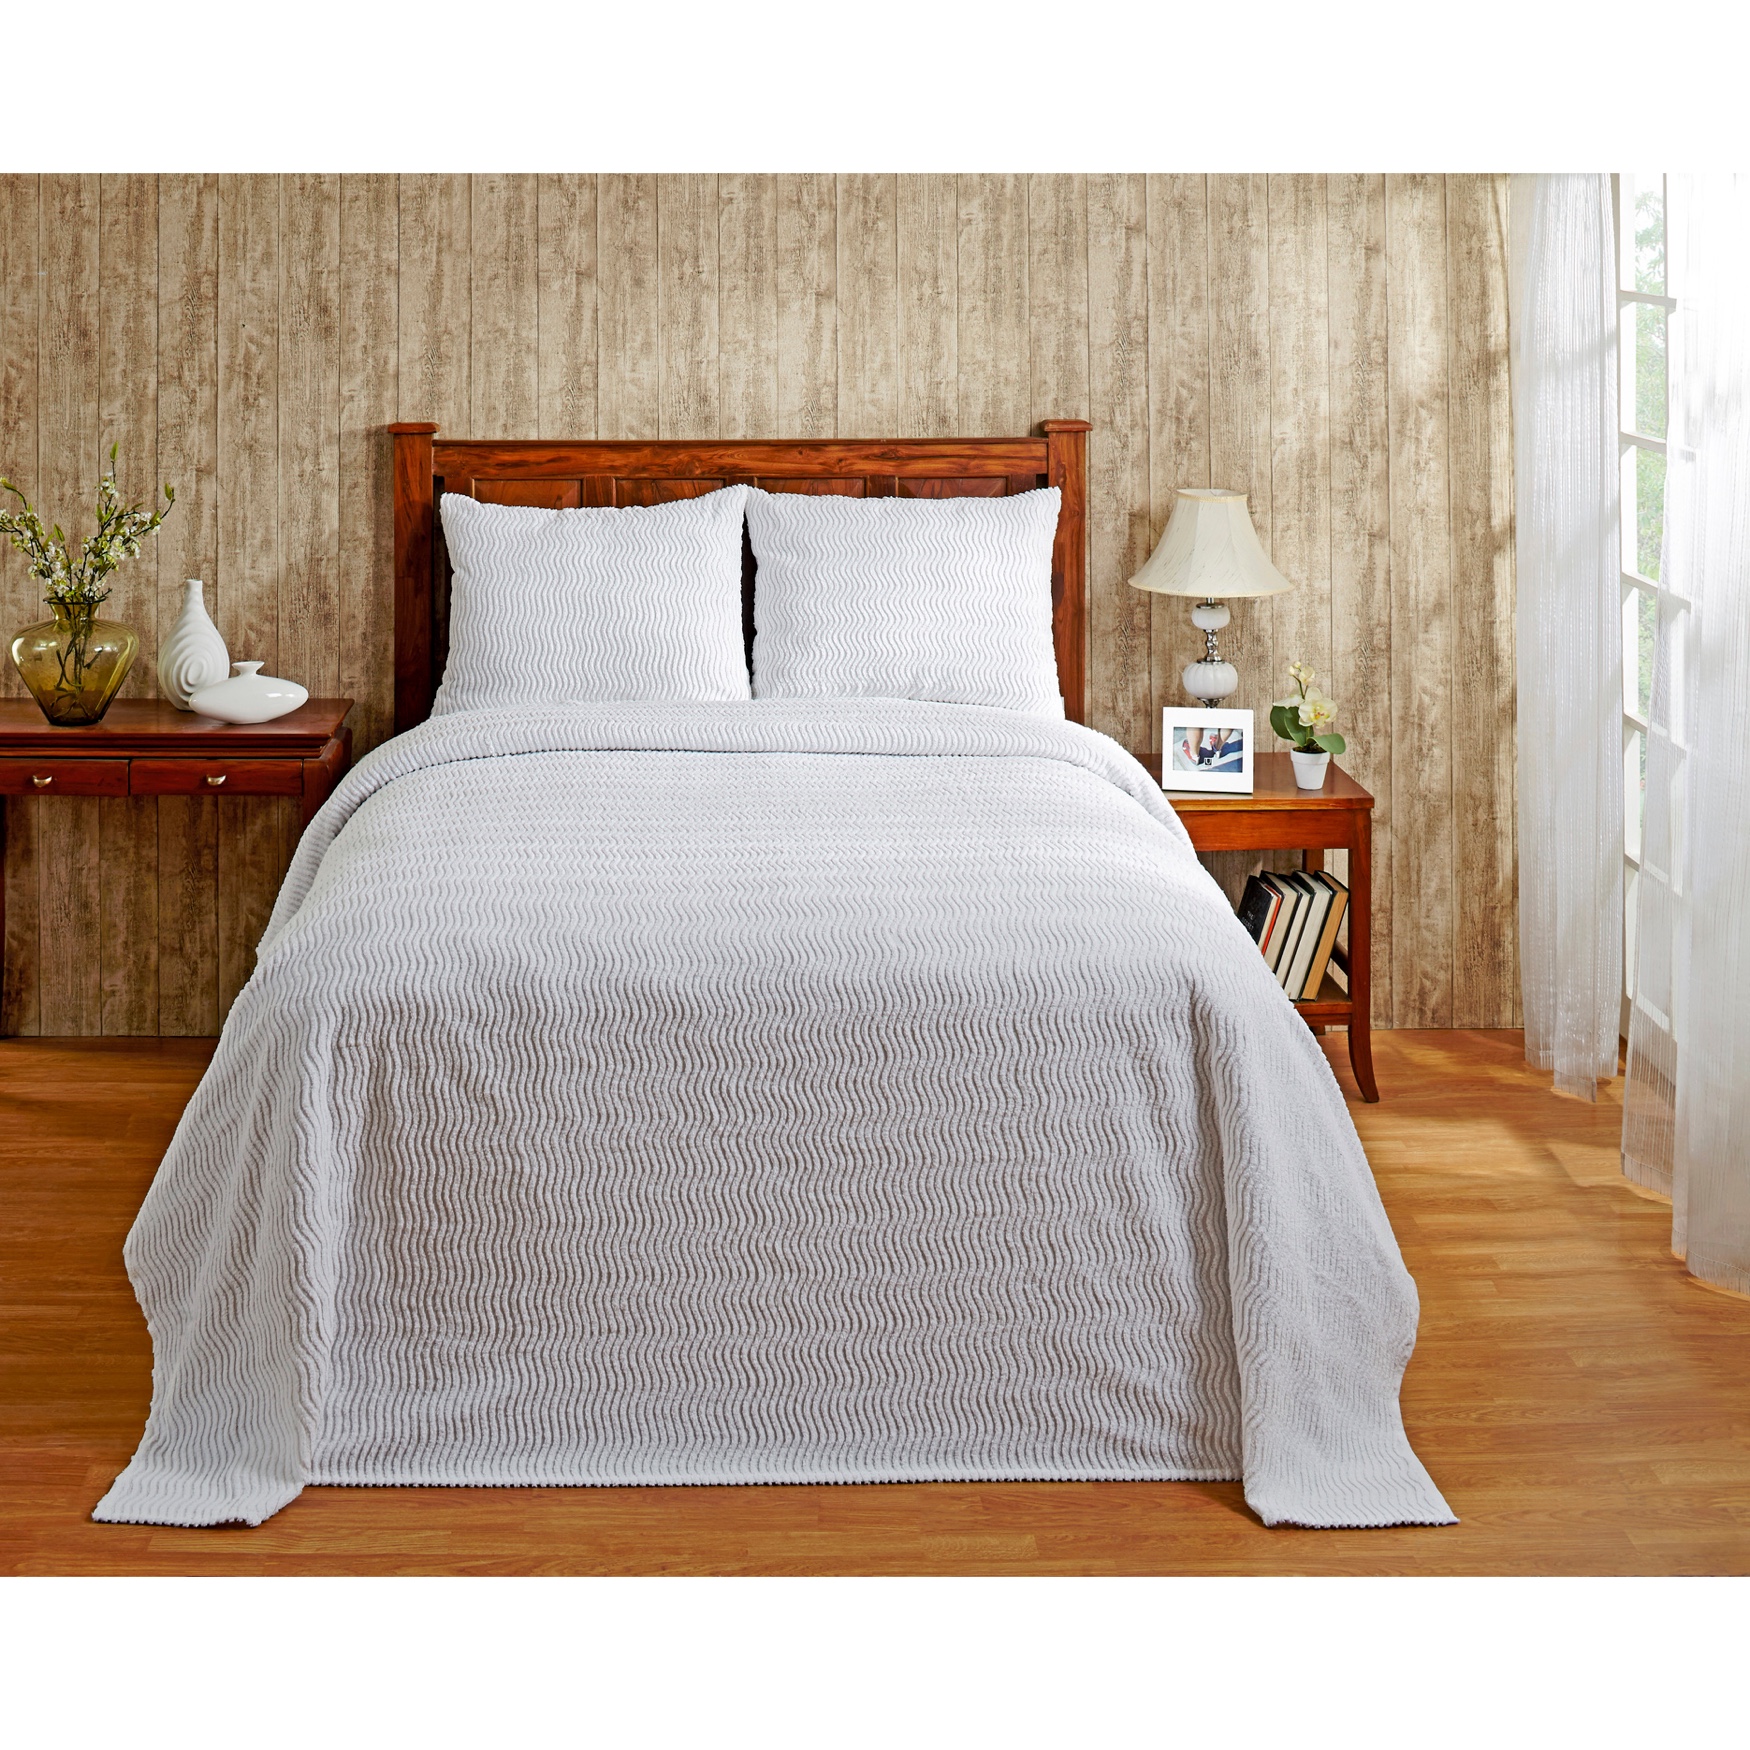 Natick Collection Tufted Chenille Bedspread , 